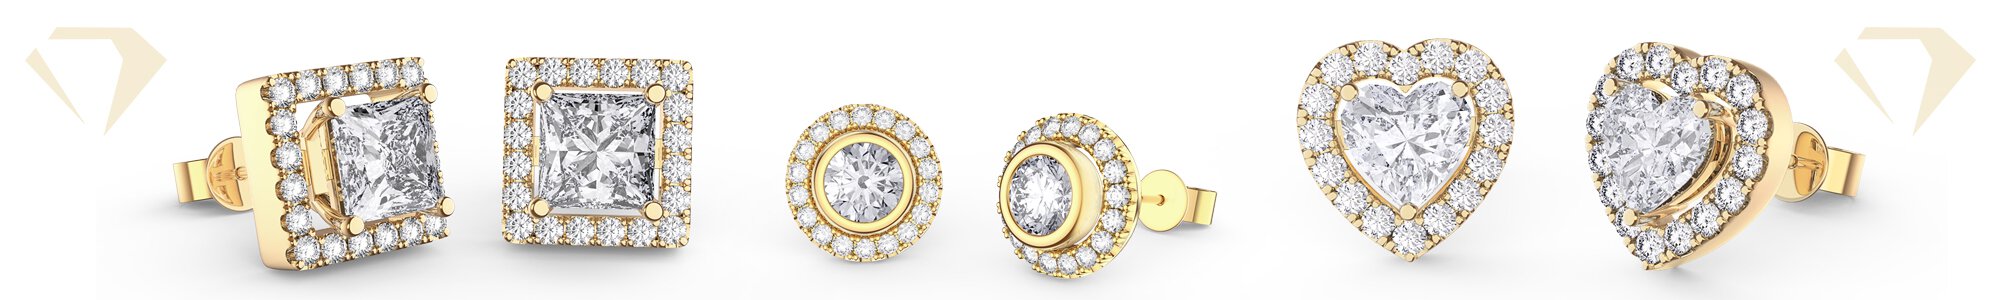 Shop 9ct Gold Earrings by Jian London. Buy direct and save from our wide selection of 9ct Gold Earrings at the Jian London jewellery Store. Free UK Delivery